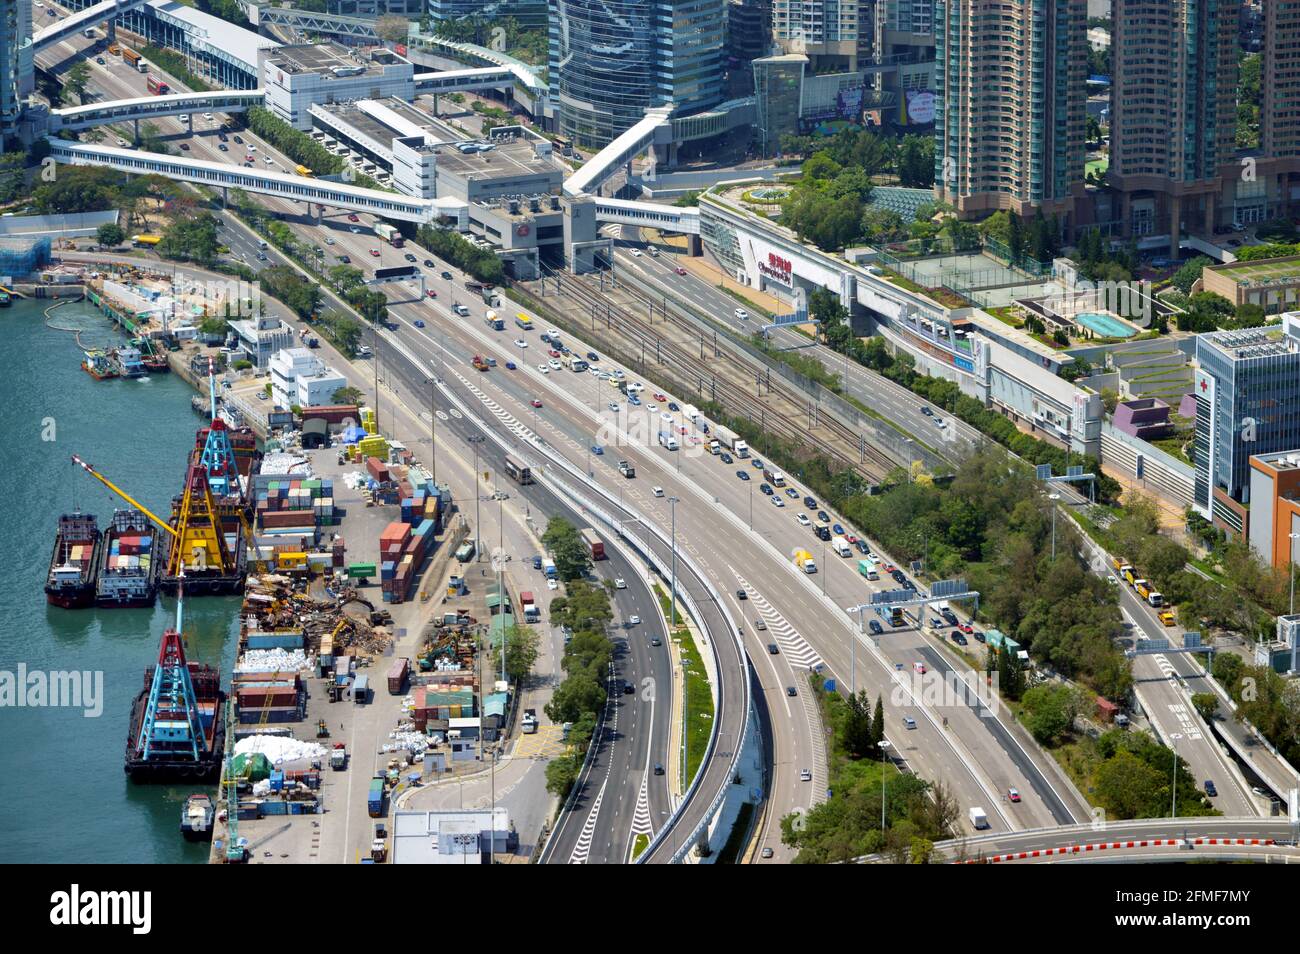 West Kowloon Highway (西九龍公路) accanto alla stazione MTR olimpica di Kowloon, Hong Kong Foto Stock